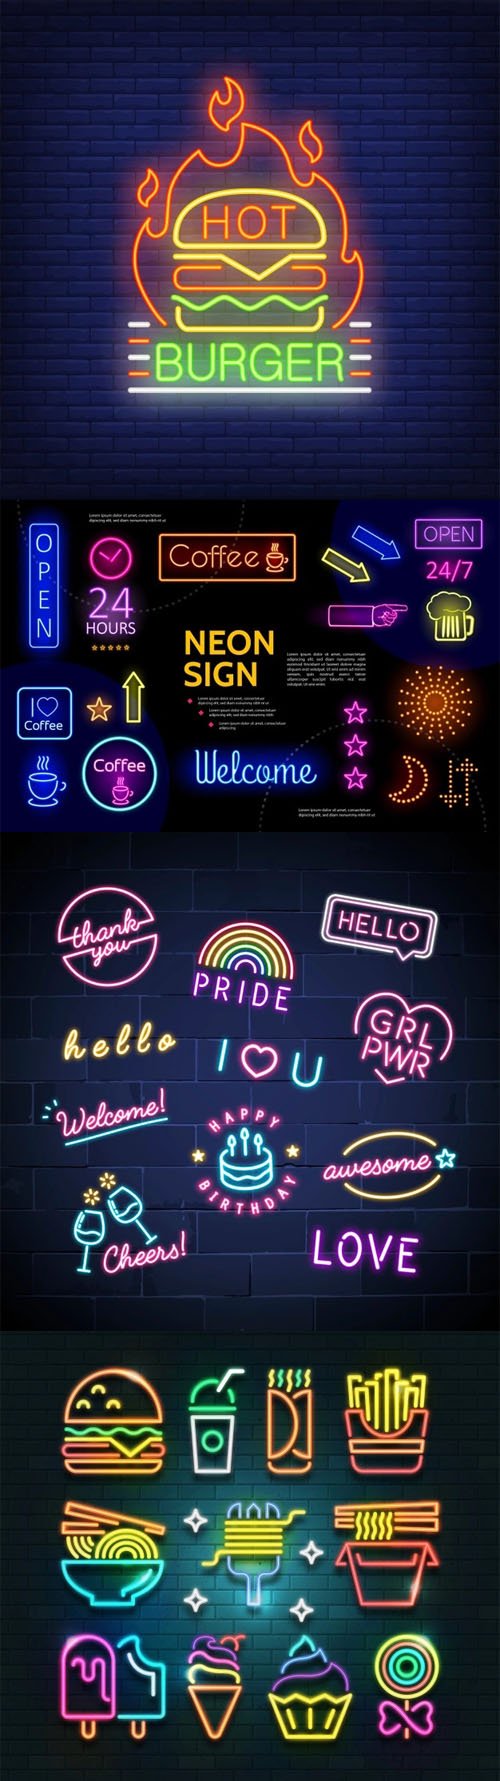 Colorful Advertising Neon Signs - Vector Elements